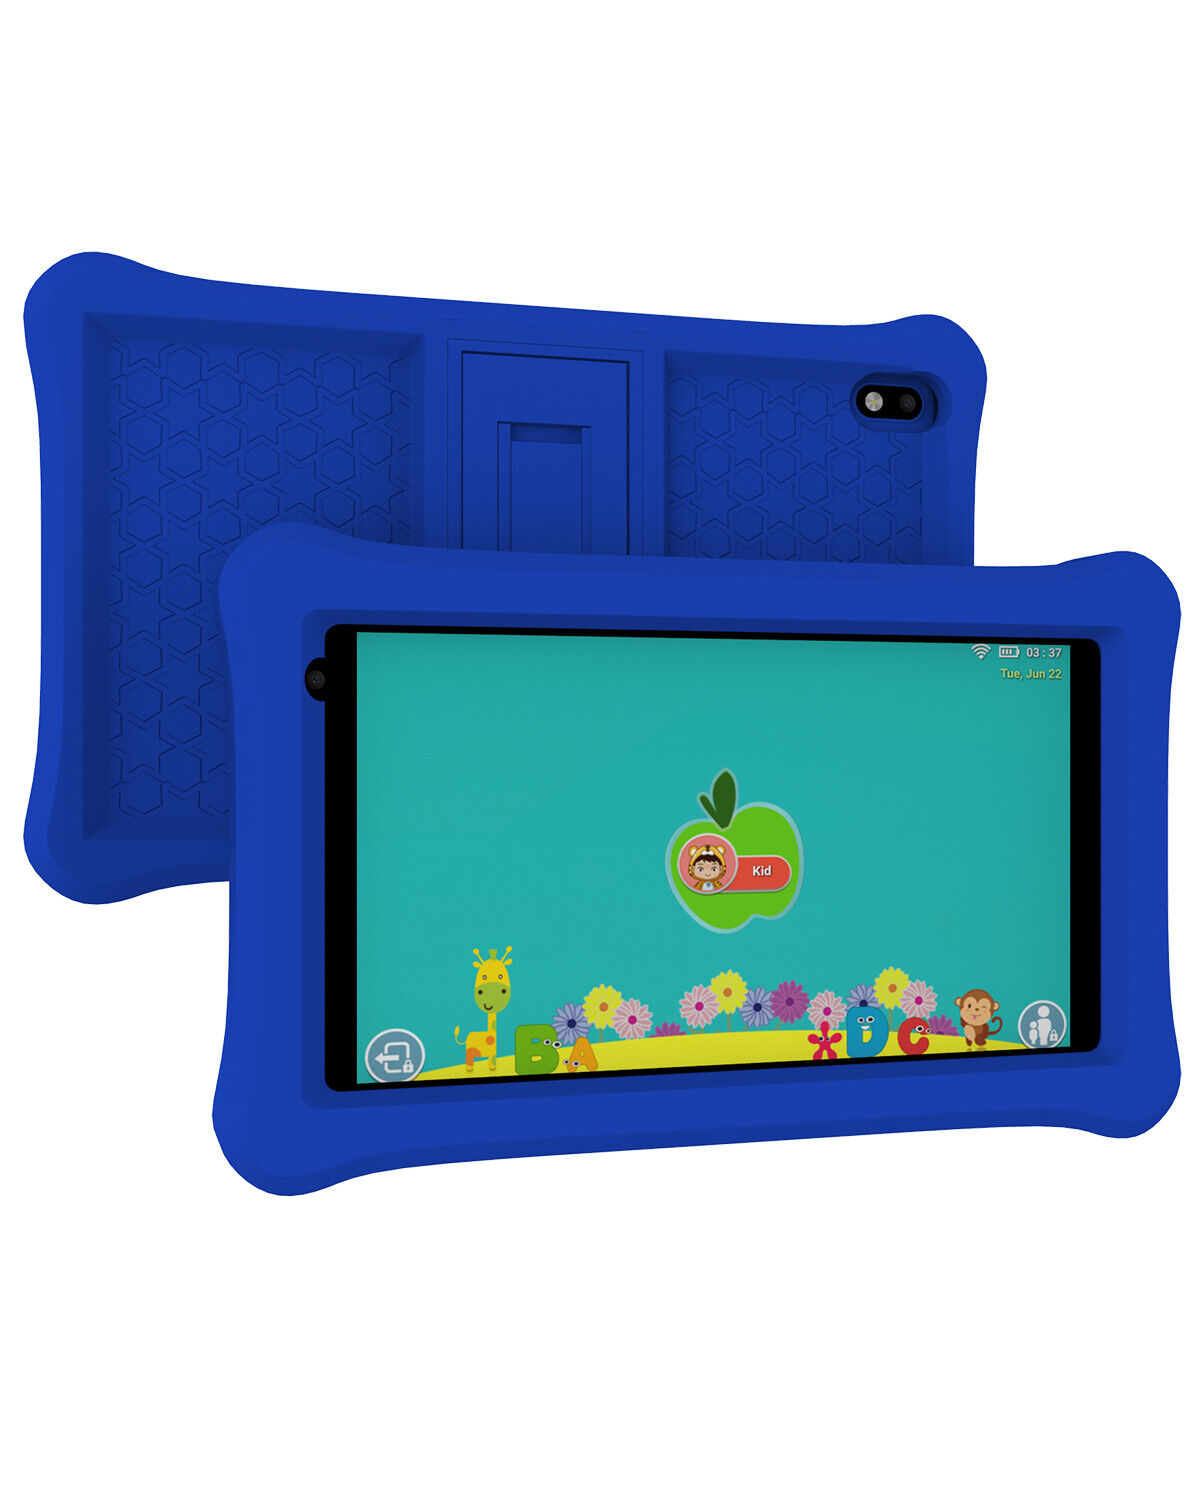 Kids Tablet 7 inch Android 11.0 Tablet for Kids 32GB Bluetooth WiFi Dual Camera